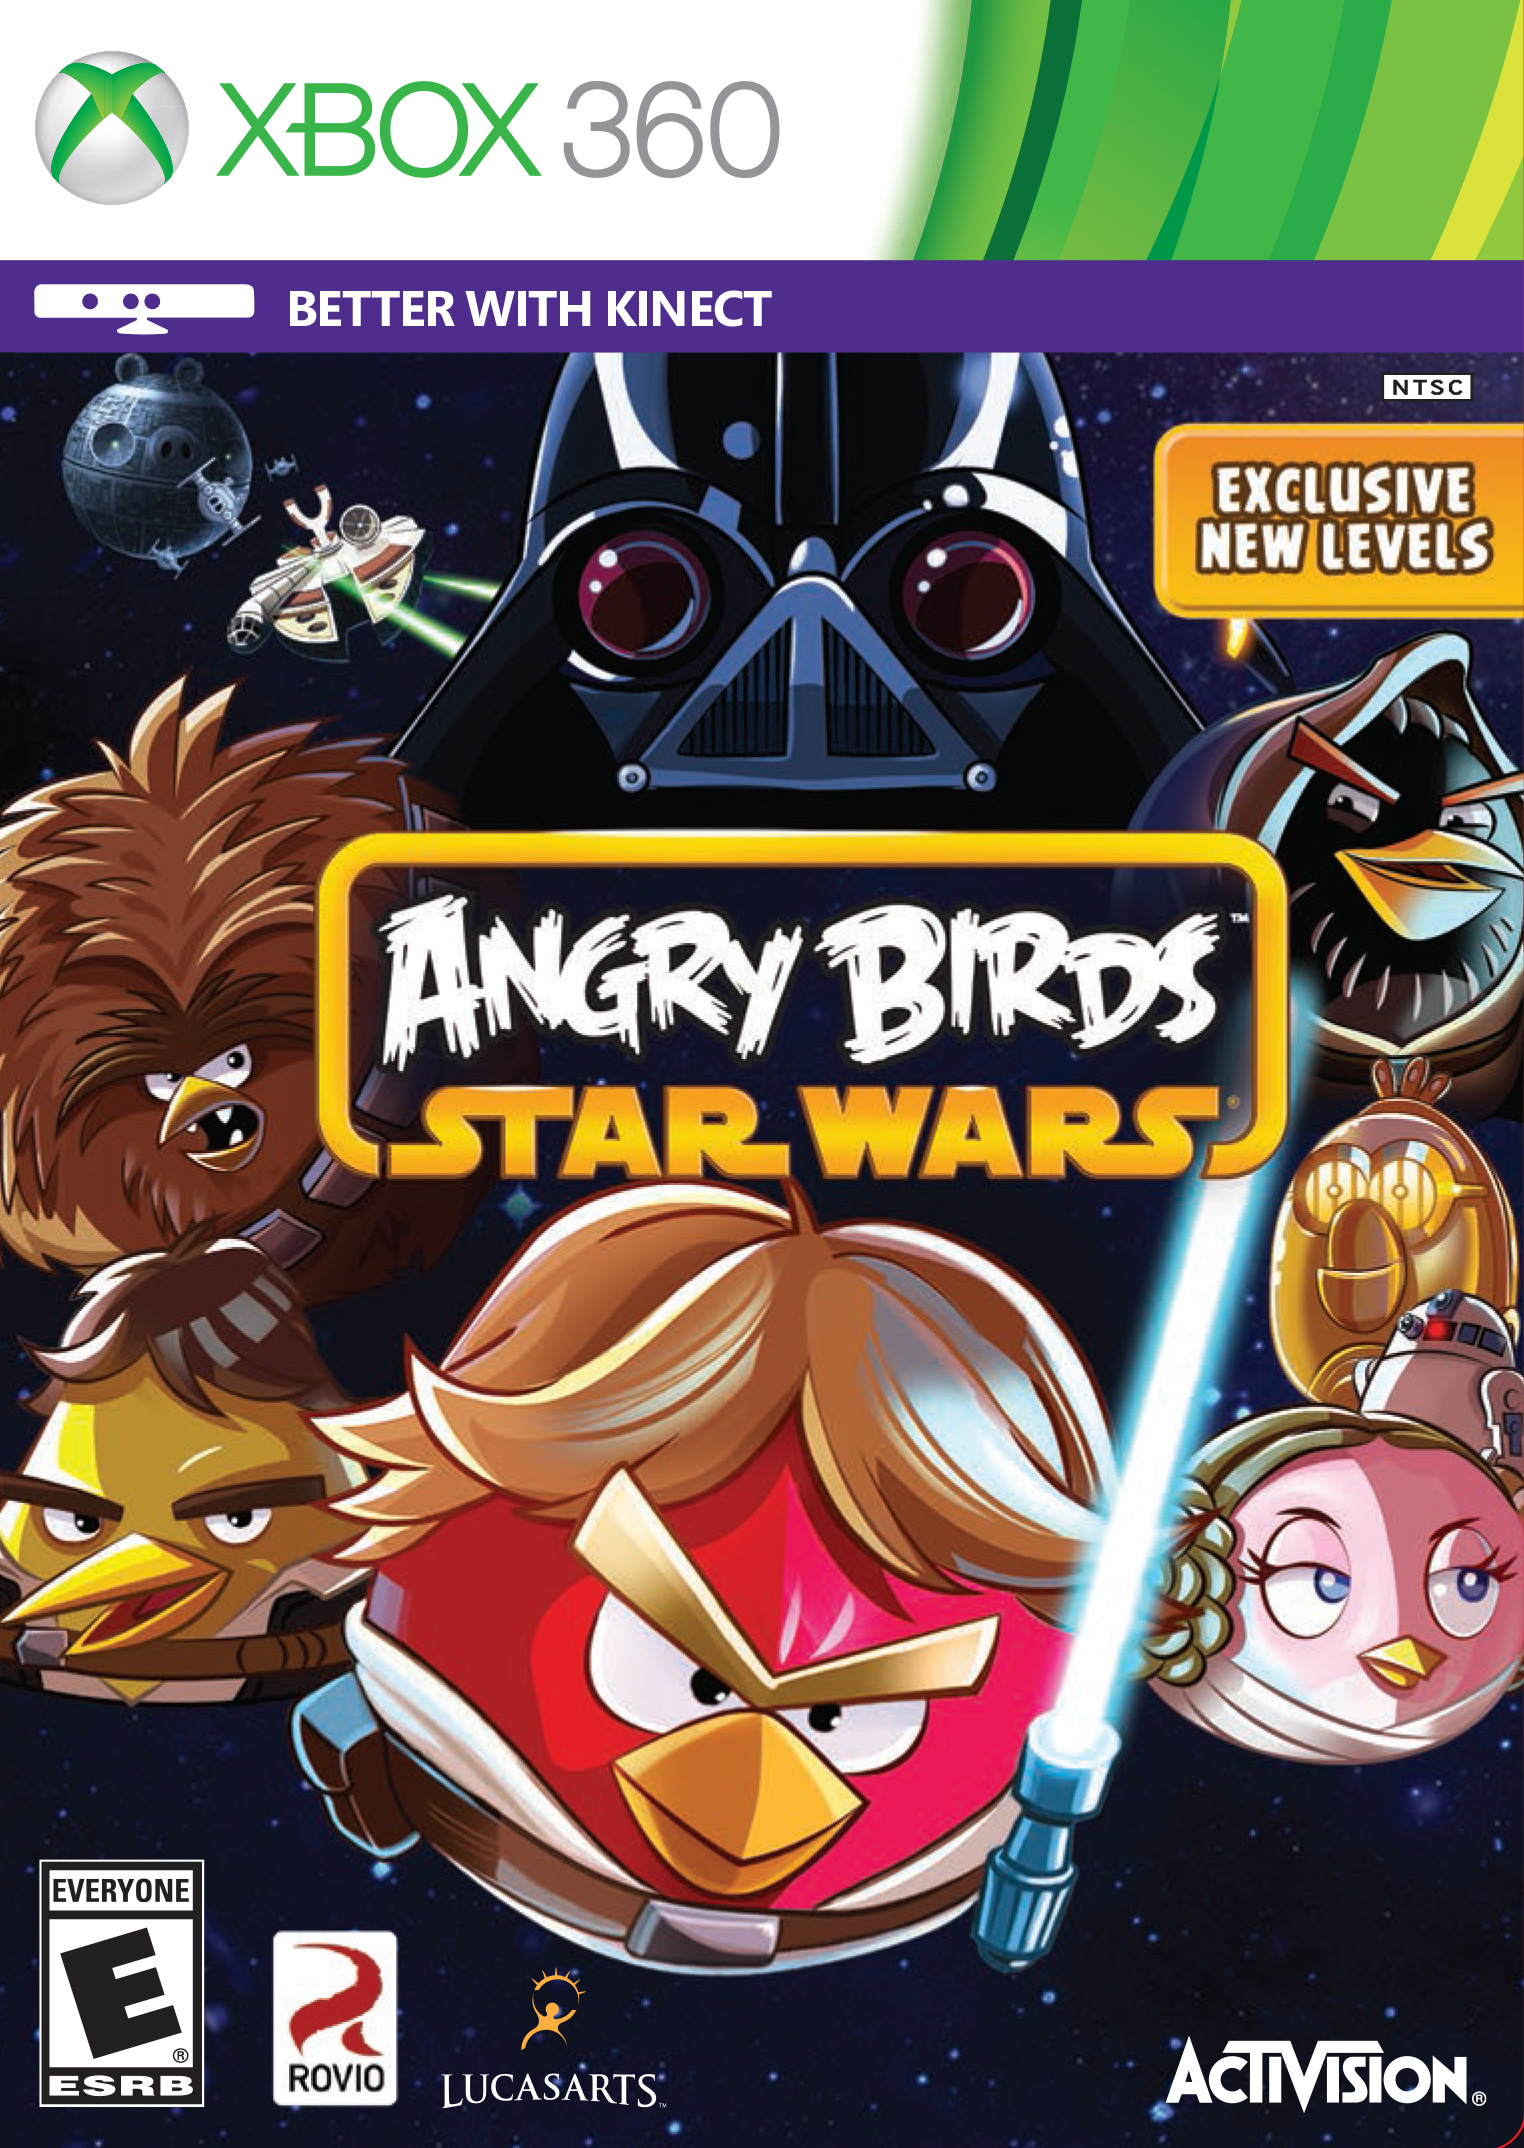 Activision Angry Birds Star Wars for Xbox 360 - Video Game - image 1 of 14